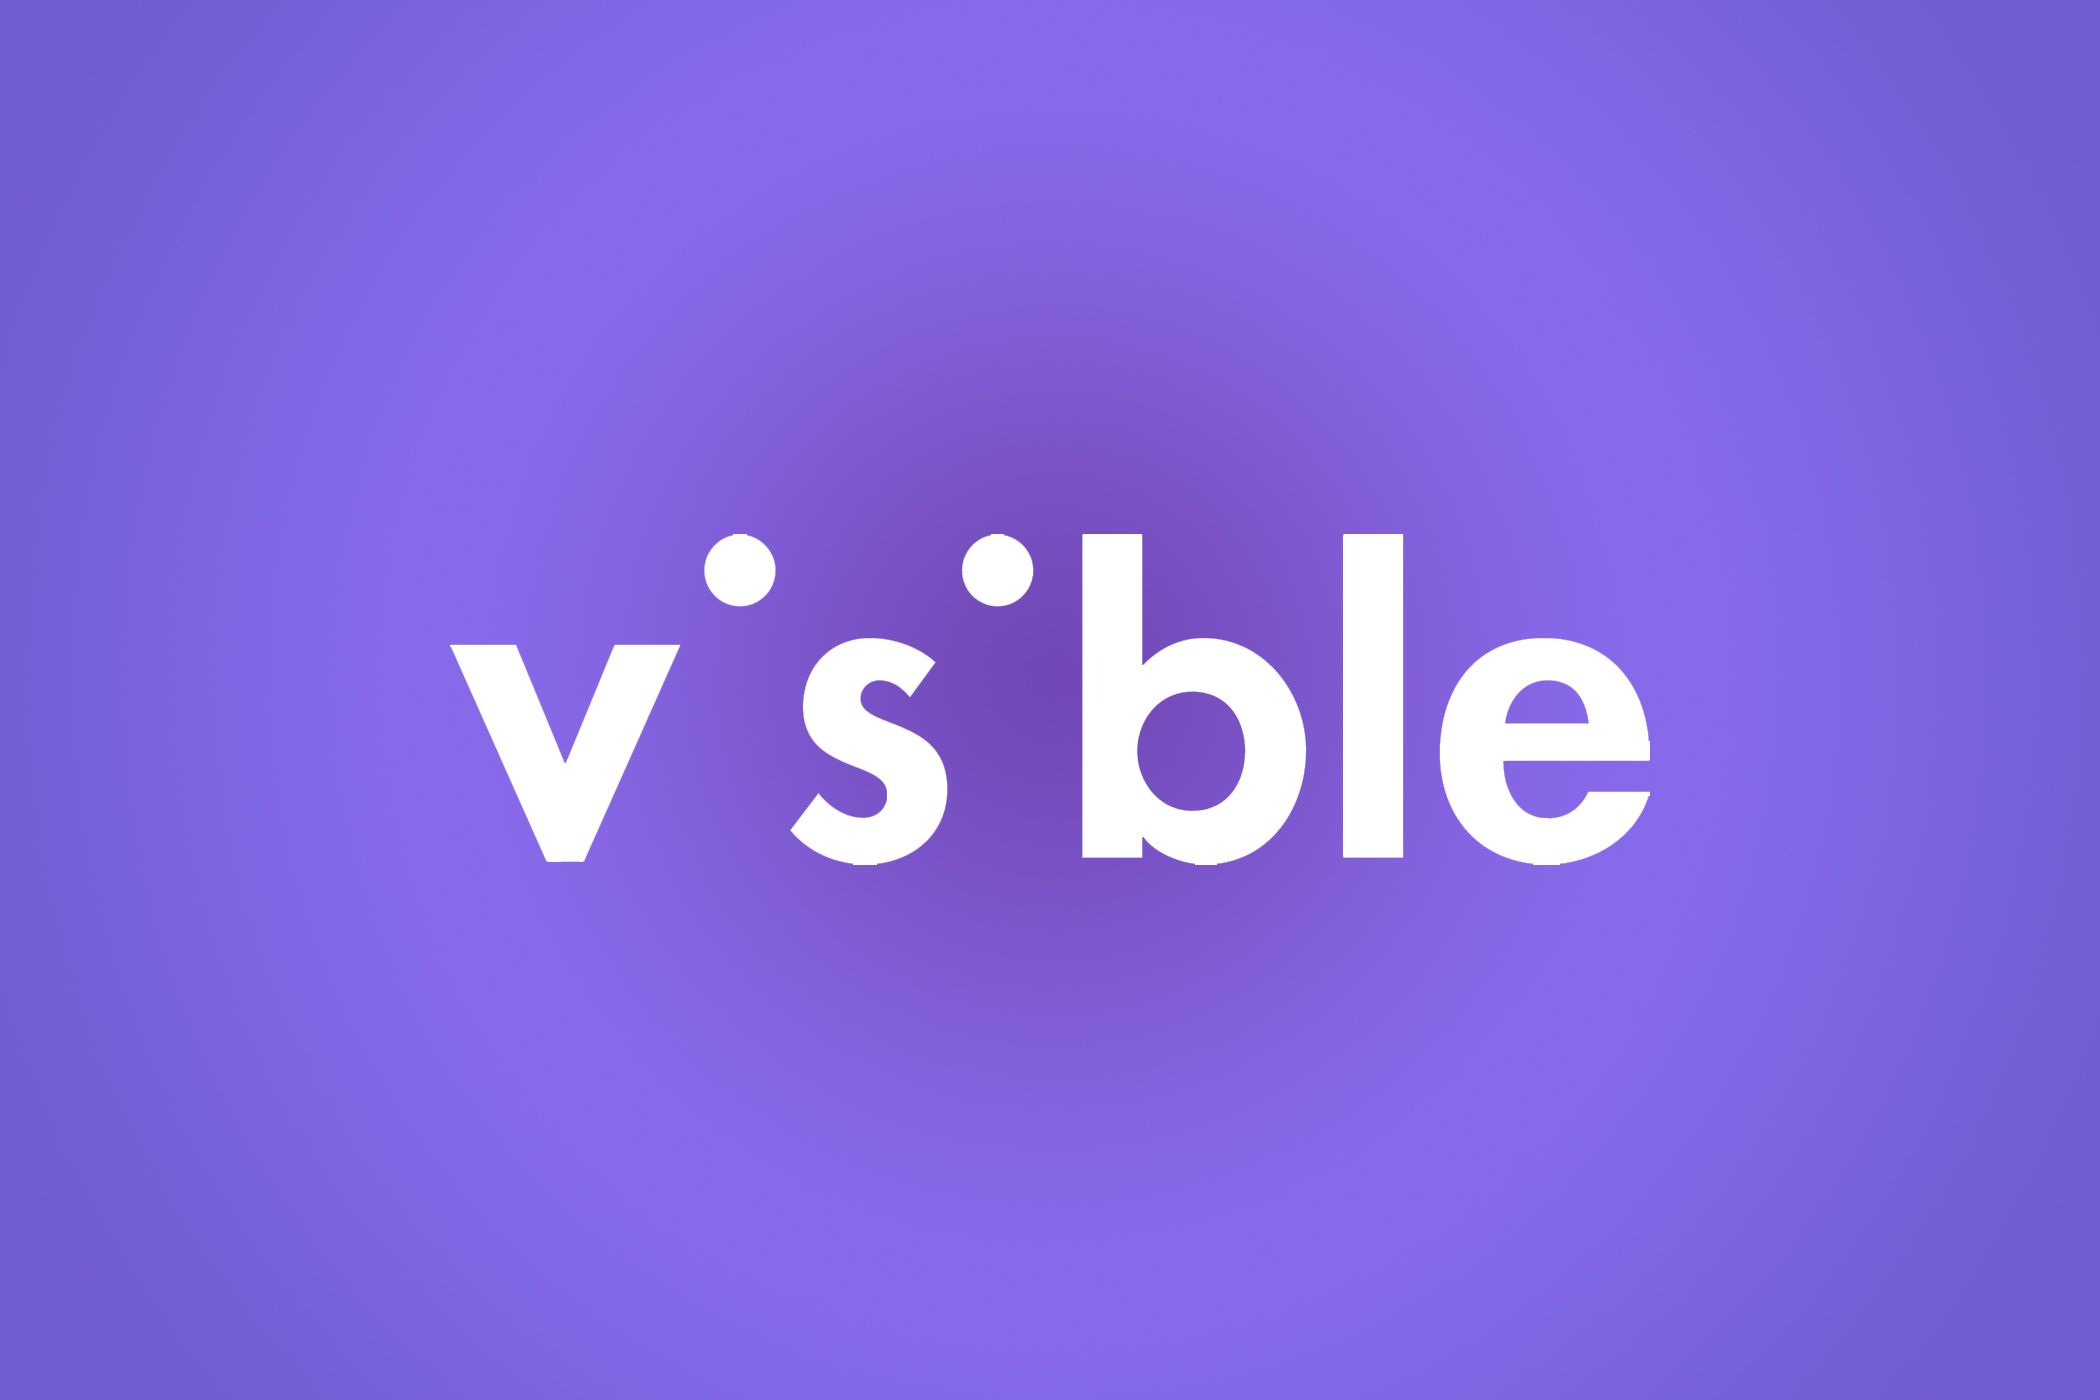 Visible logo in white letters on a purple background.